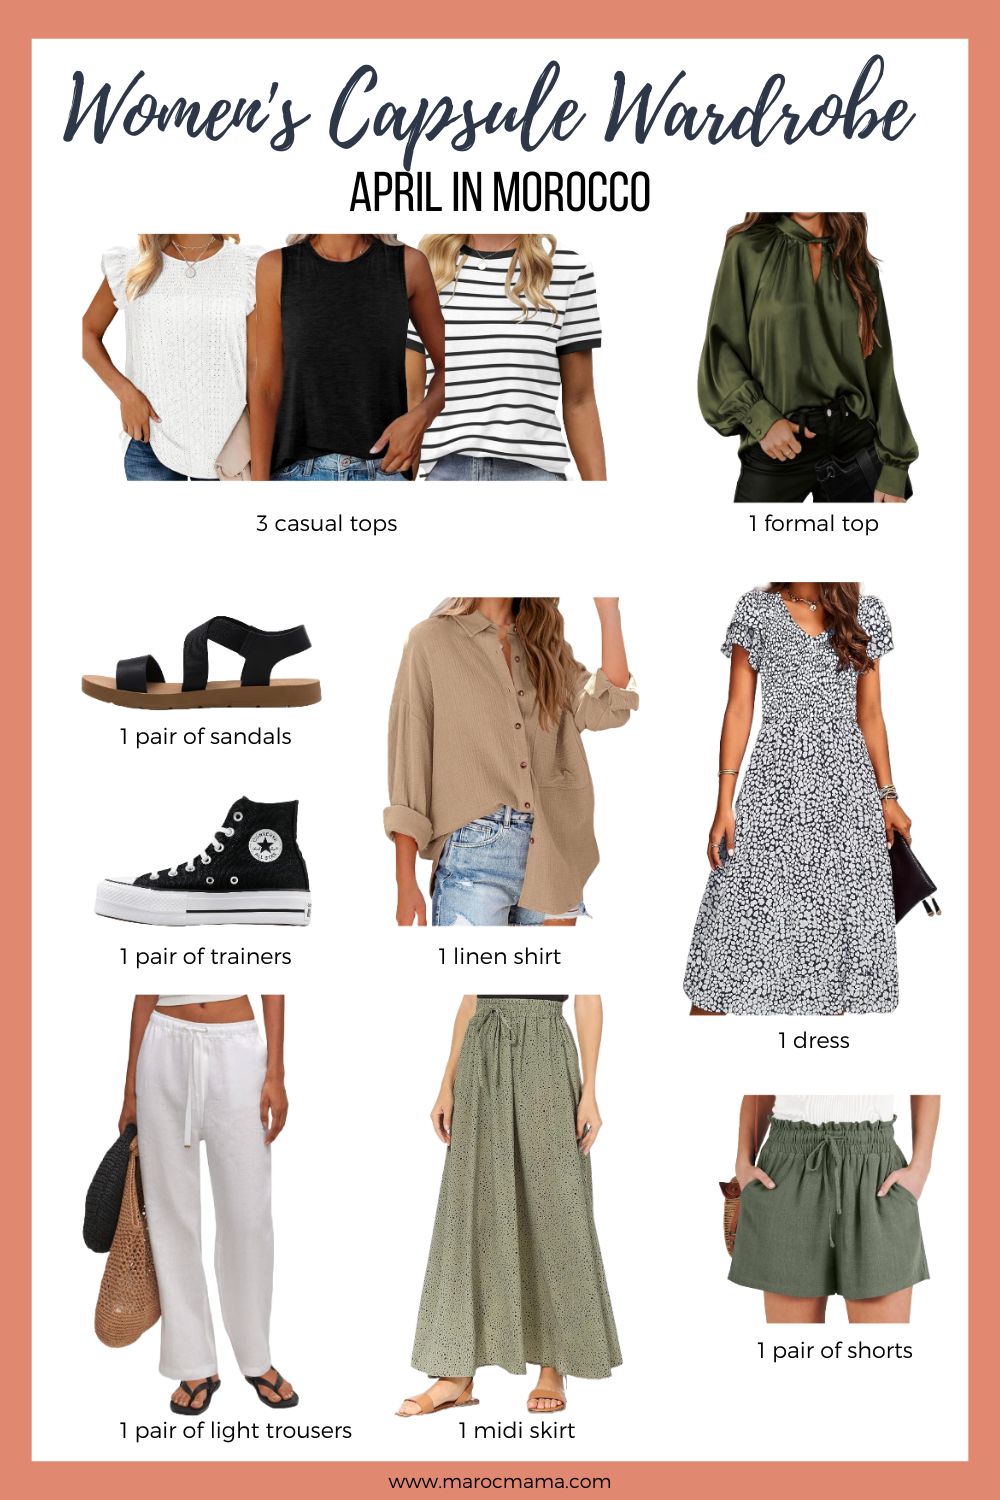 3 casual t-shirts 1 formal top 1 pair of light trousers 2 other bottoms (skirts/shorts) 1 linen shirt/sun cover to shade you from the sun 1 pair of trainers 1 pair of sandals With the text Women's Capsule Wardrobe, April in Morocco